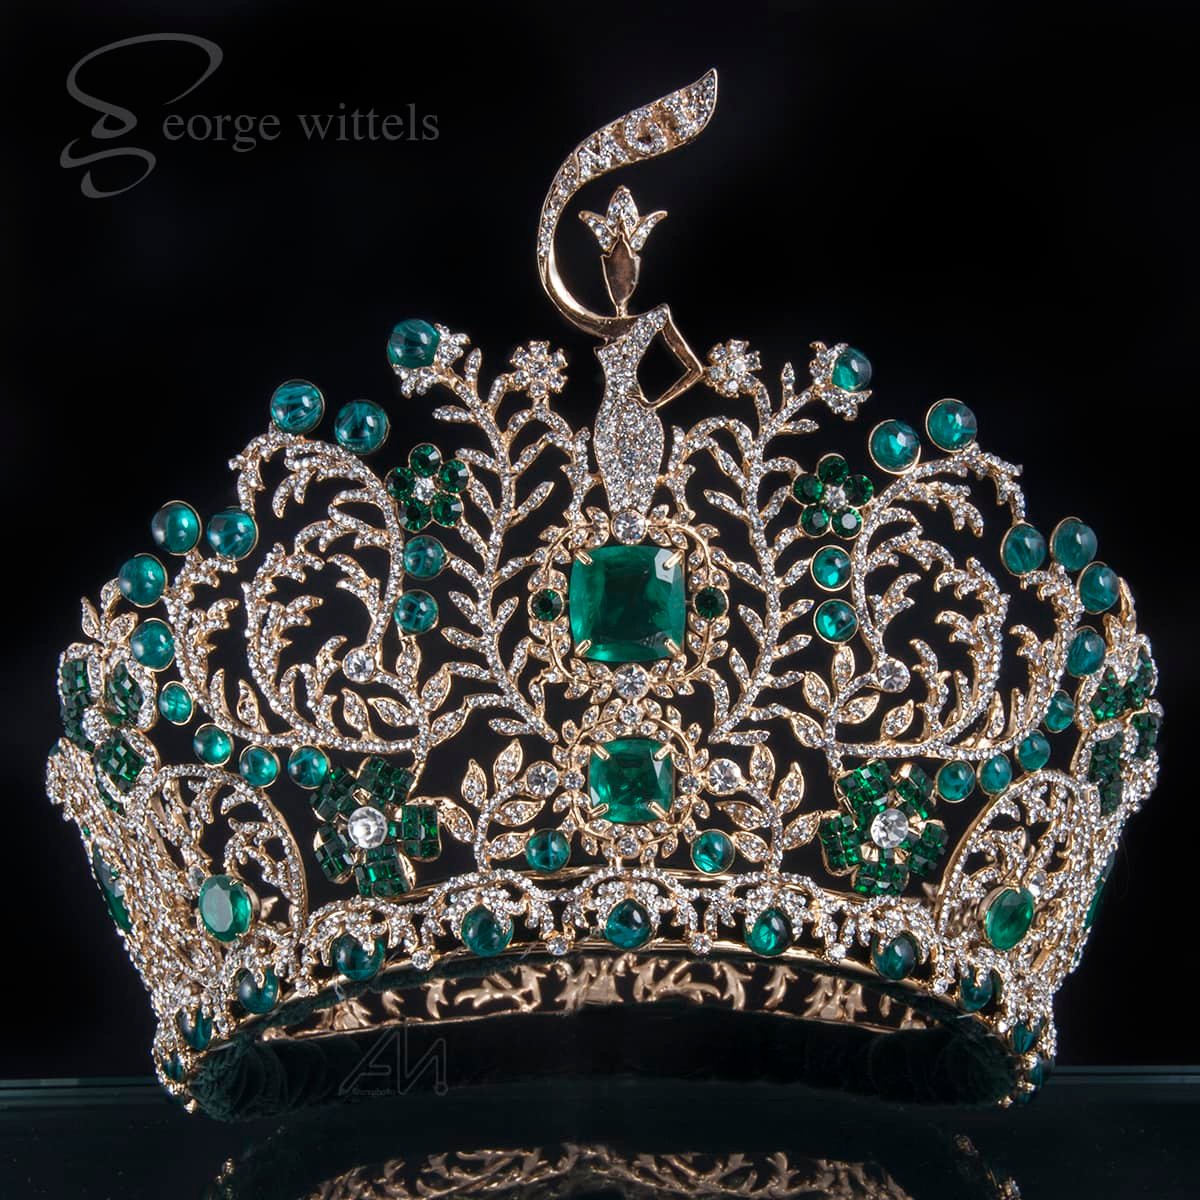 The Golden Crown - The crown of the Miss Grand International beauty pageant